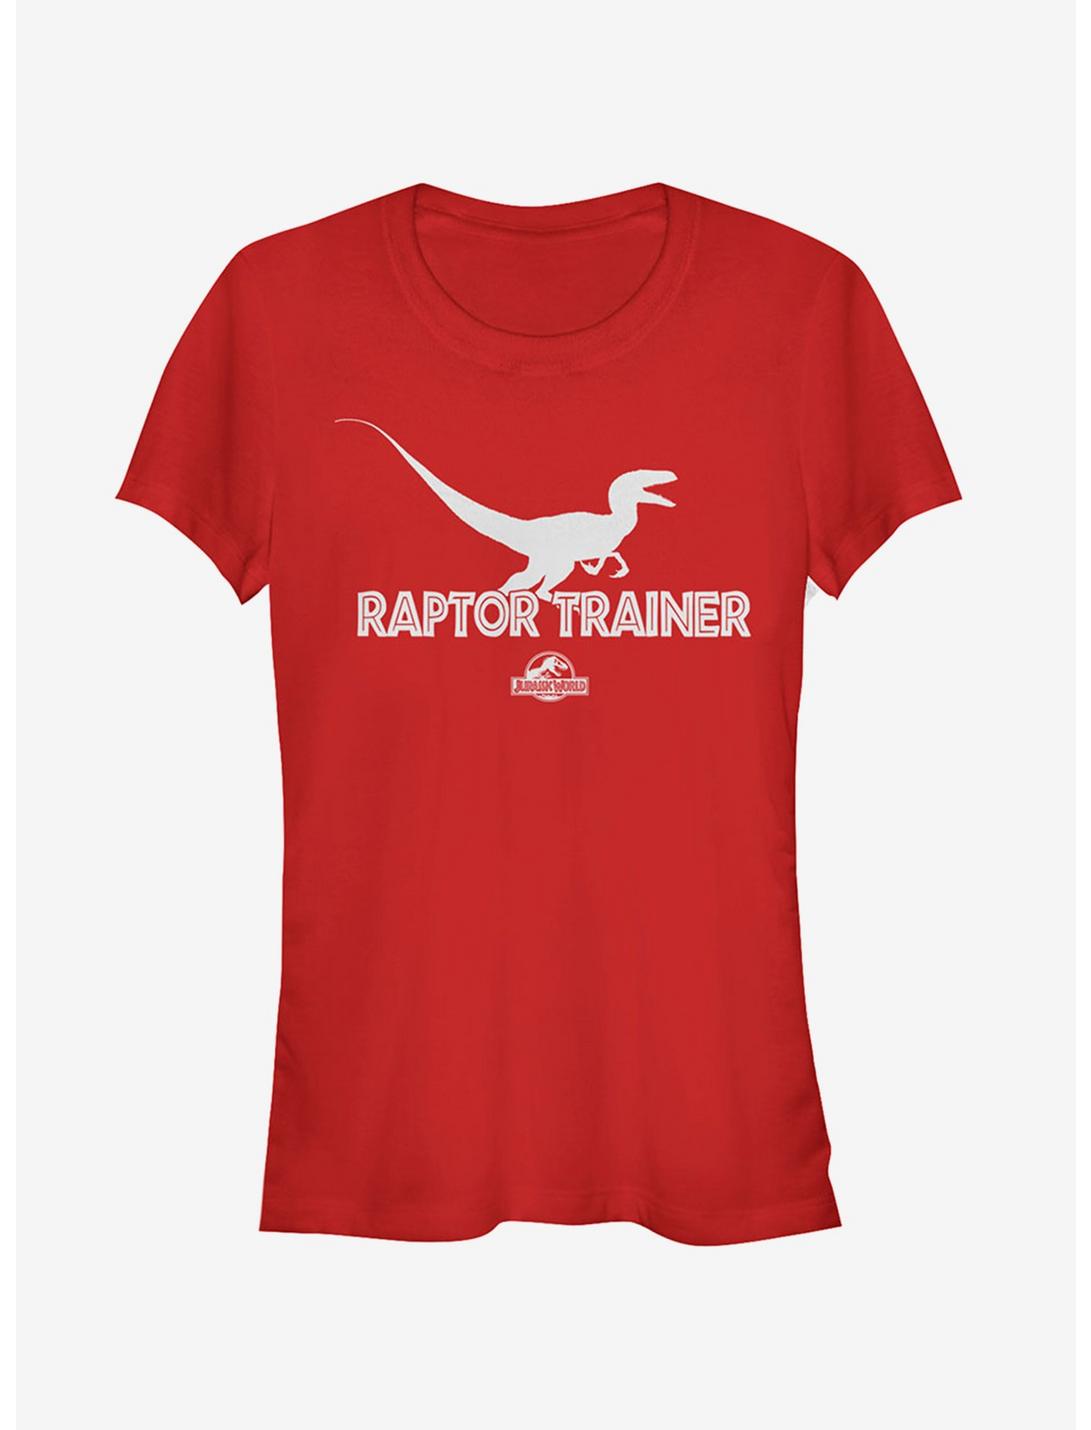 Raptor Trainer Silhouette Girls T-Shirt, RED, hi-res